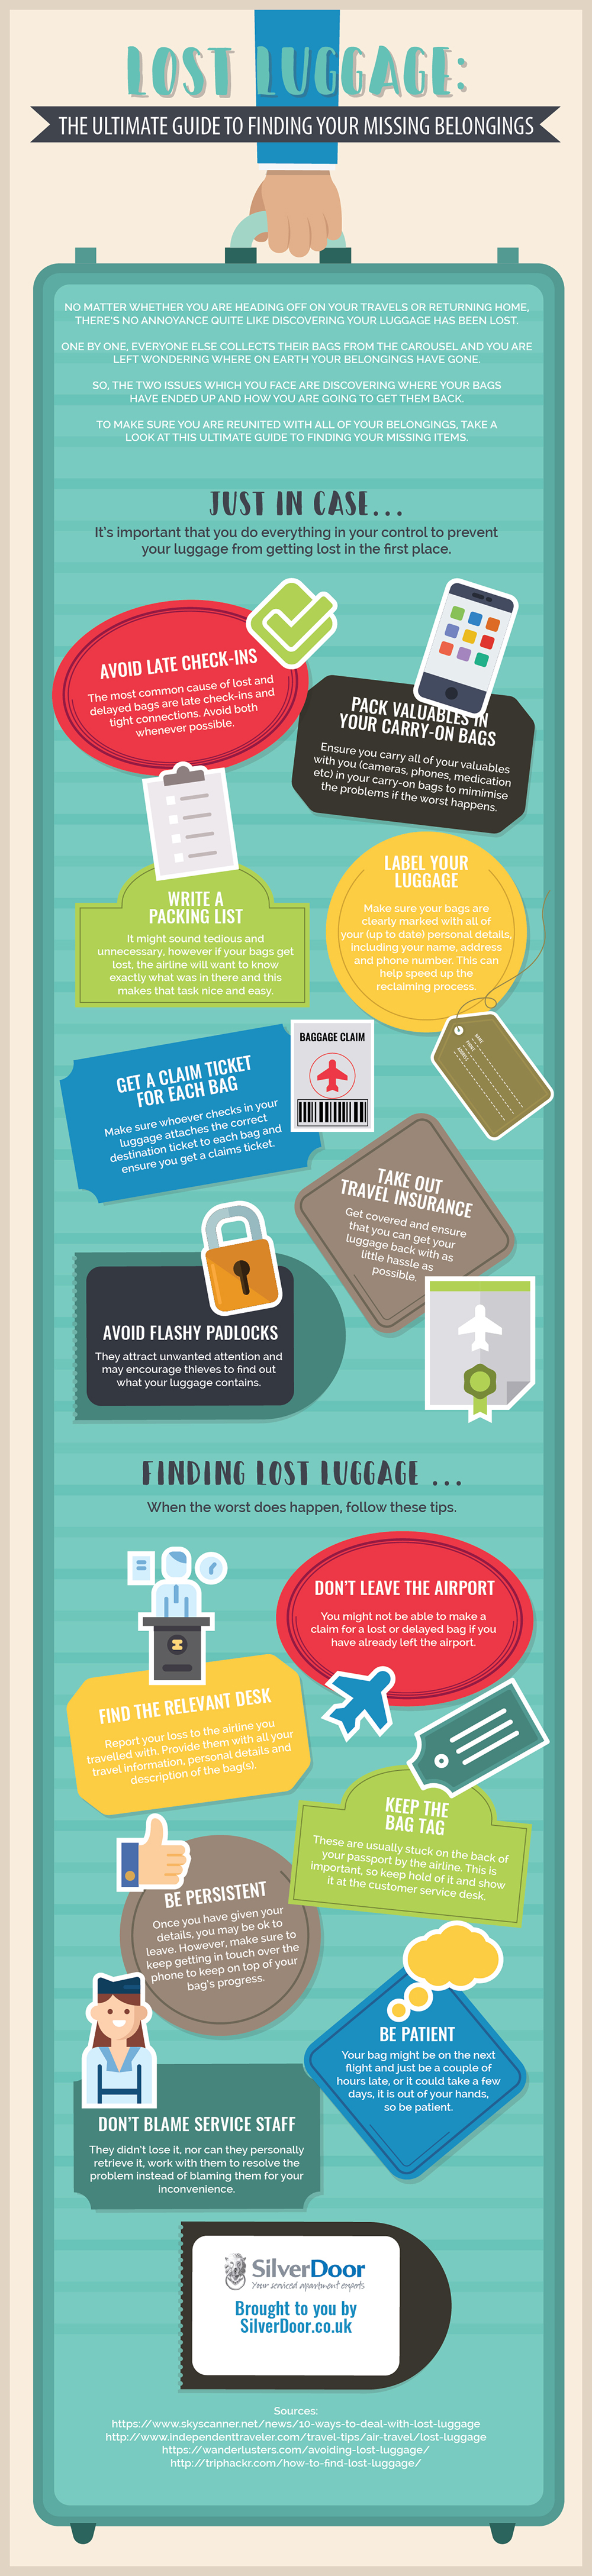 How to Retrieve Lost Luggage: The Ultimate Guide - Infographic